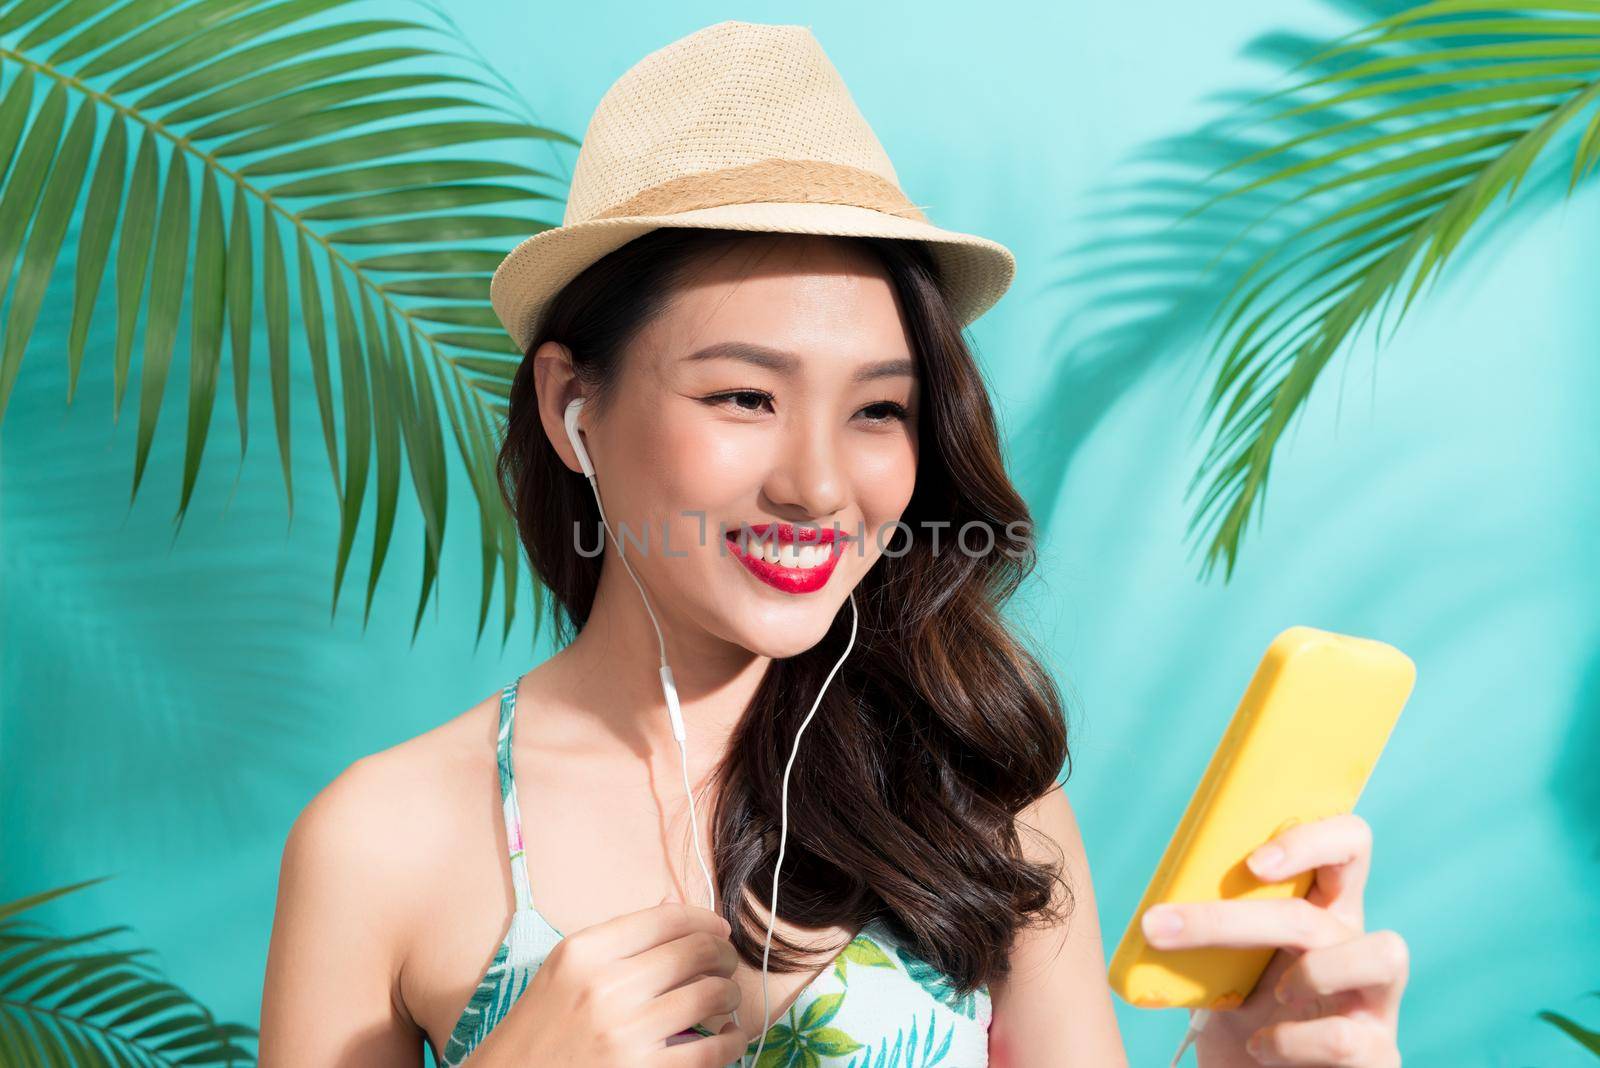 Summer fashion girl standing and smiling over vibrant blue background by makidotvn